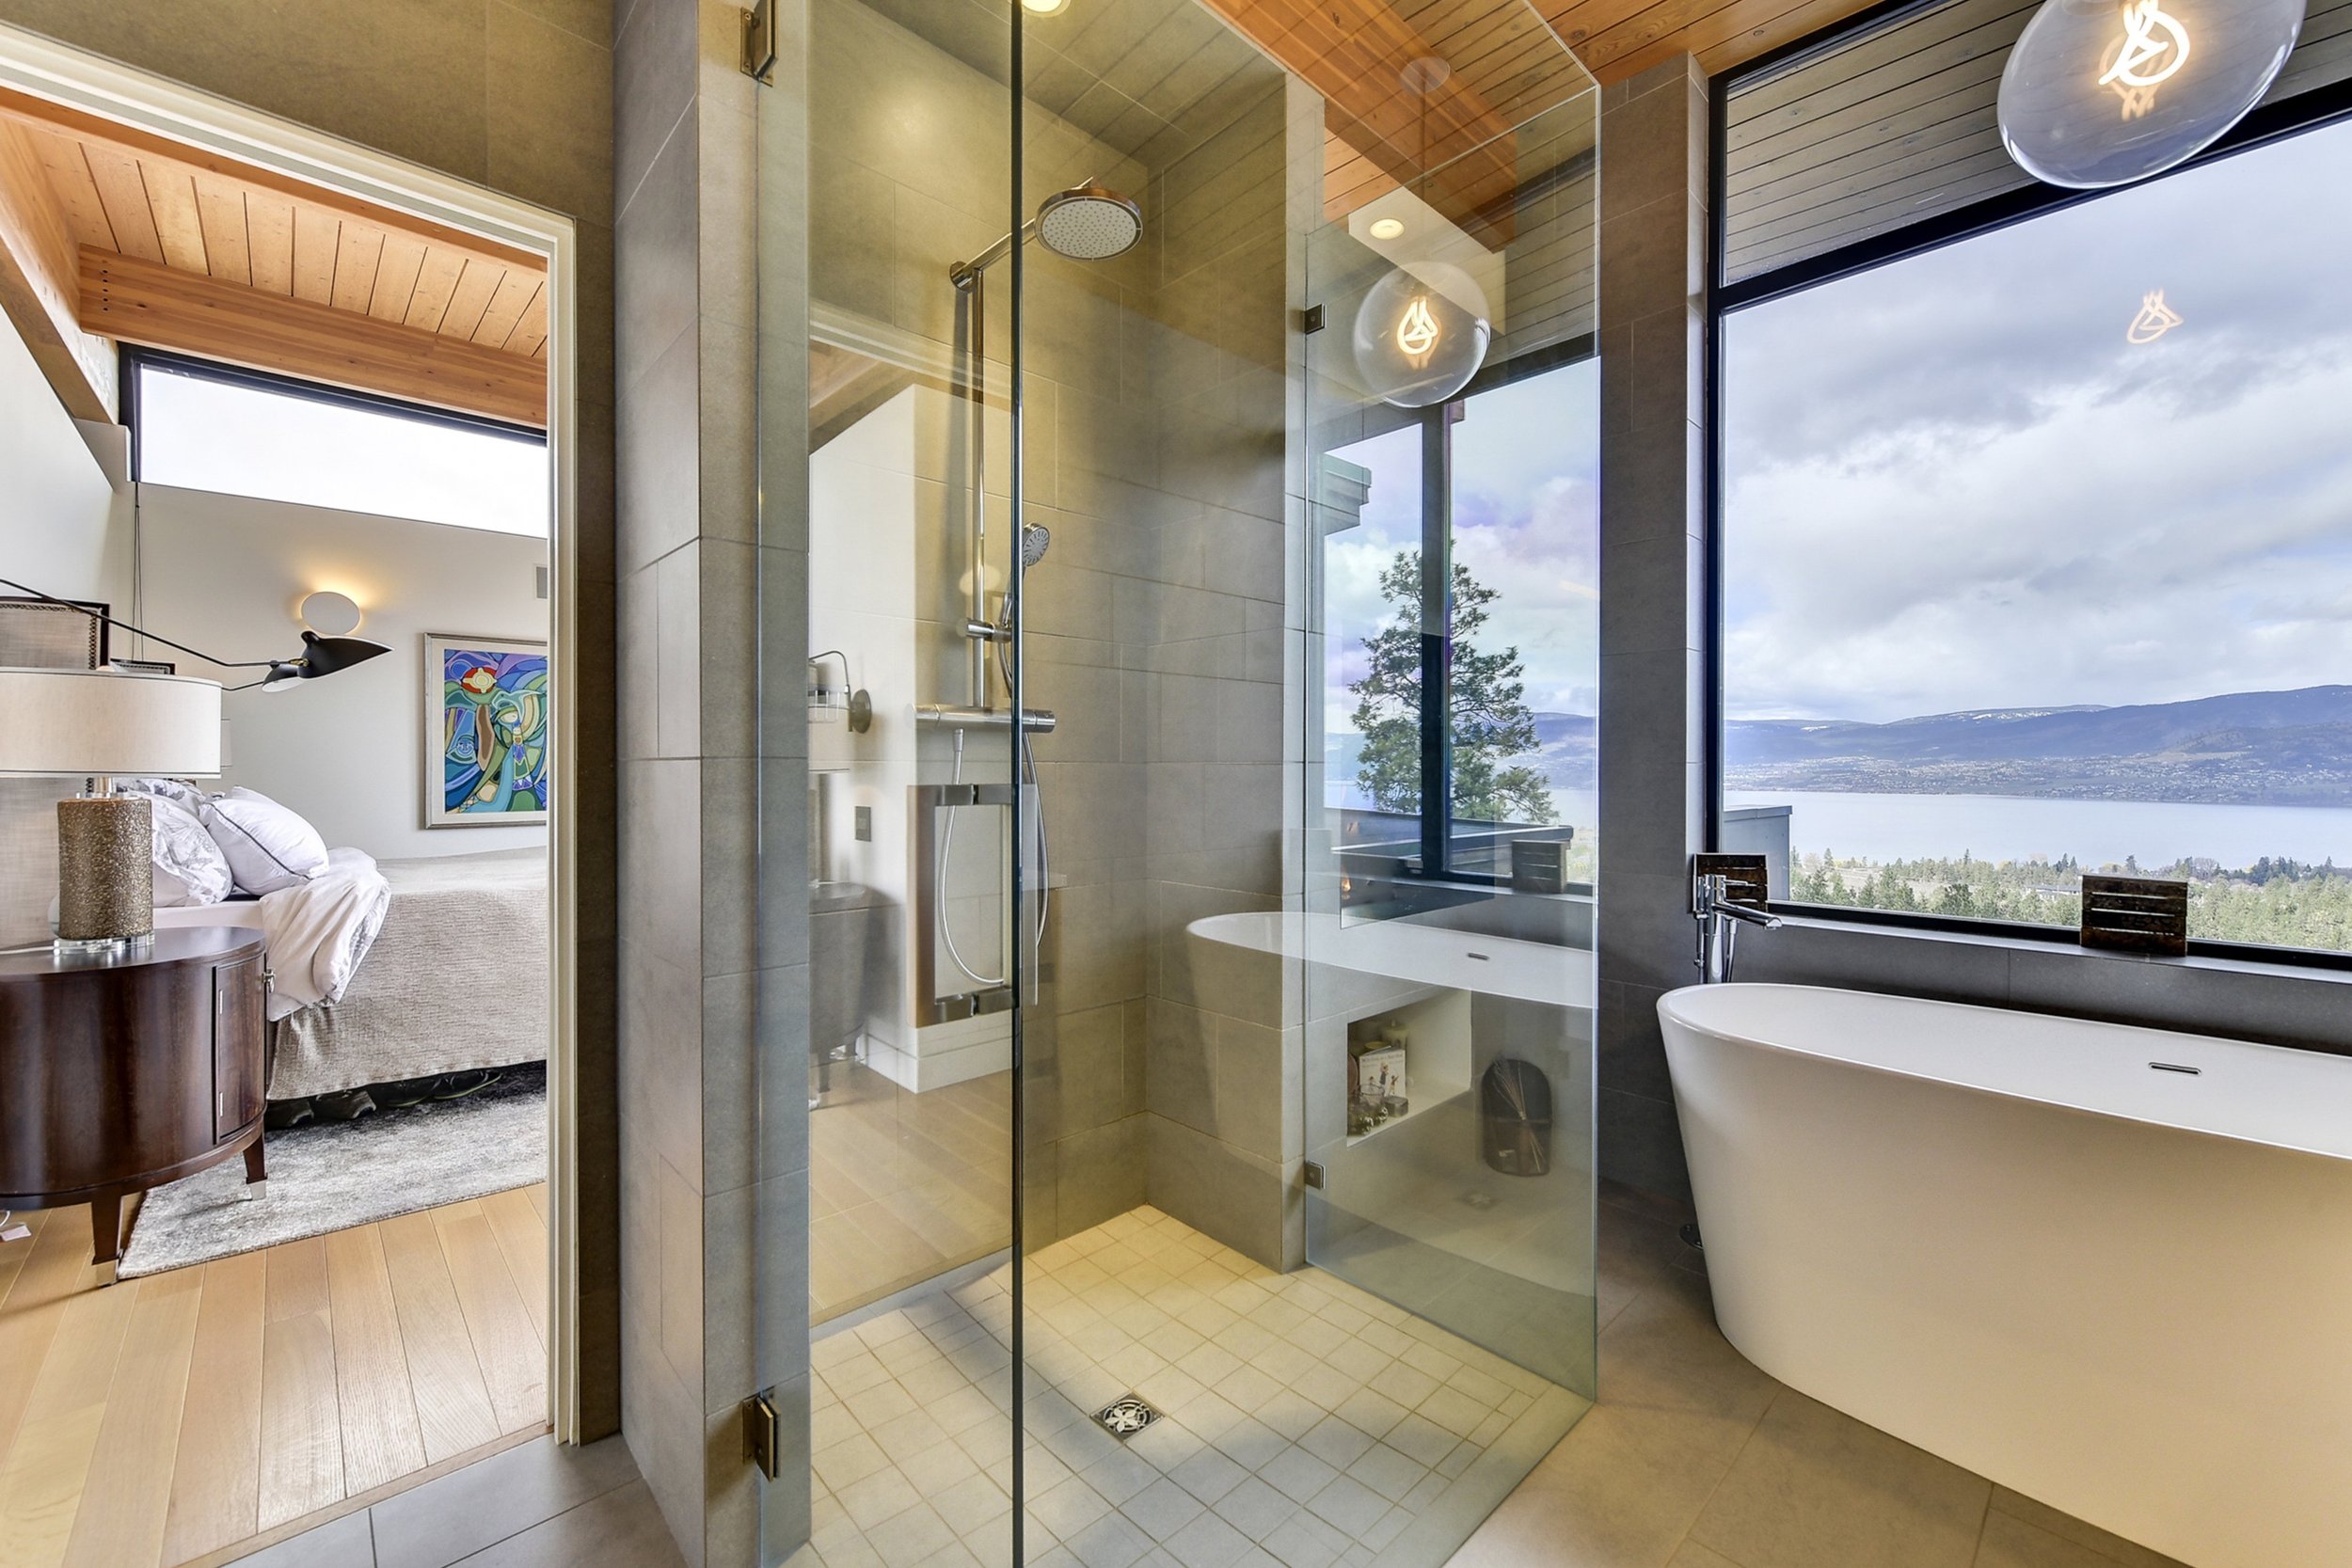 041-Keys-to-Kelowna-Airbnb-vacation-rental-property-management-Luxury-Family-Home-Upper-Mission-Ensuite-039.jpg